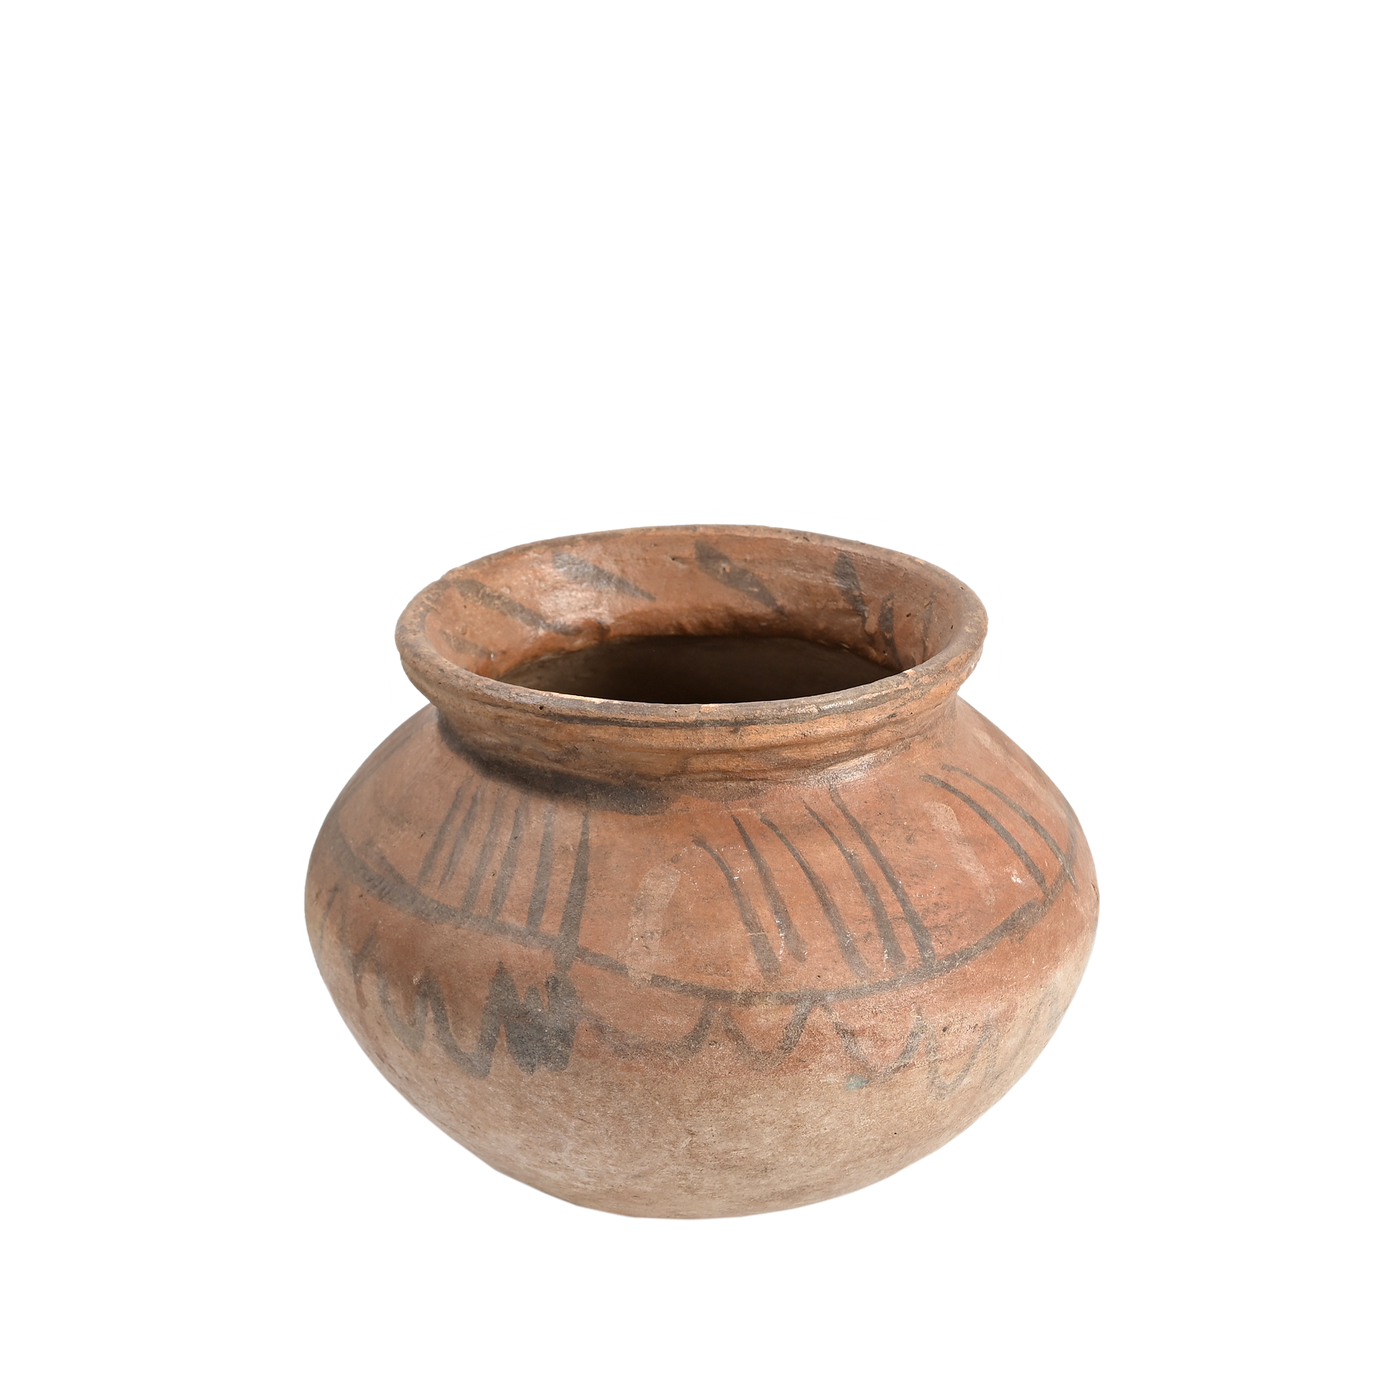 Gaon - Poterie traditionnelle n°29